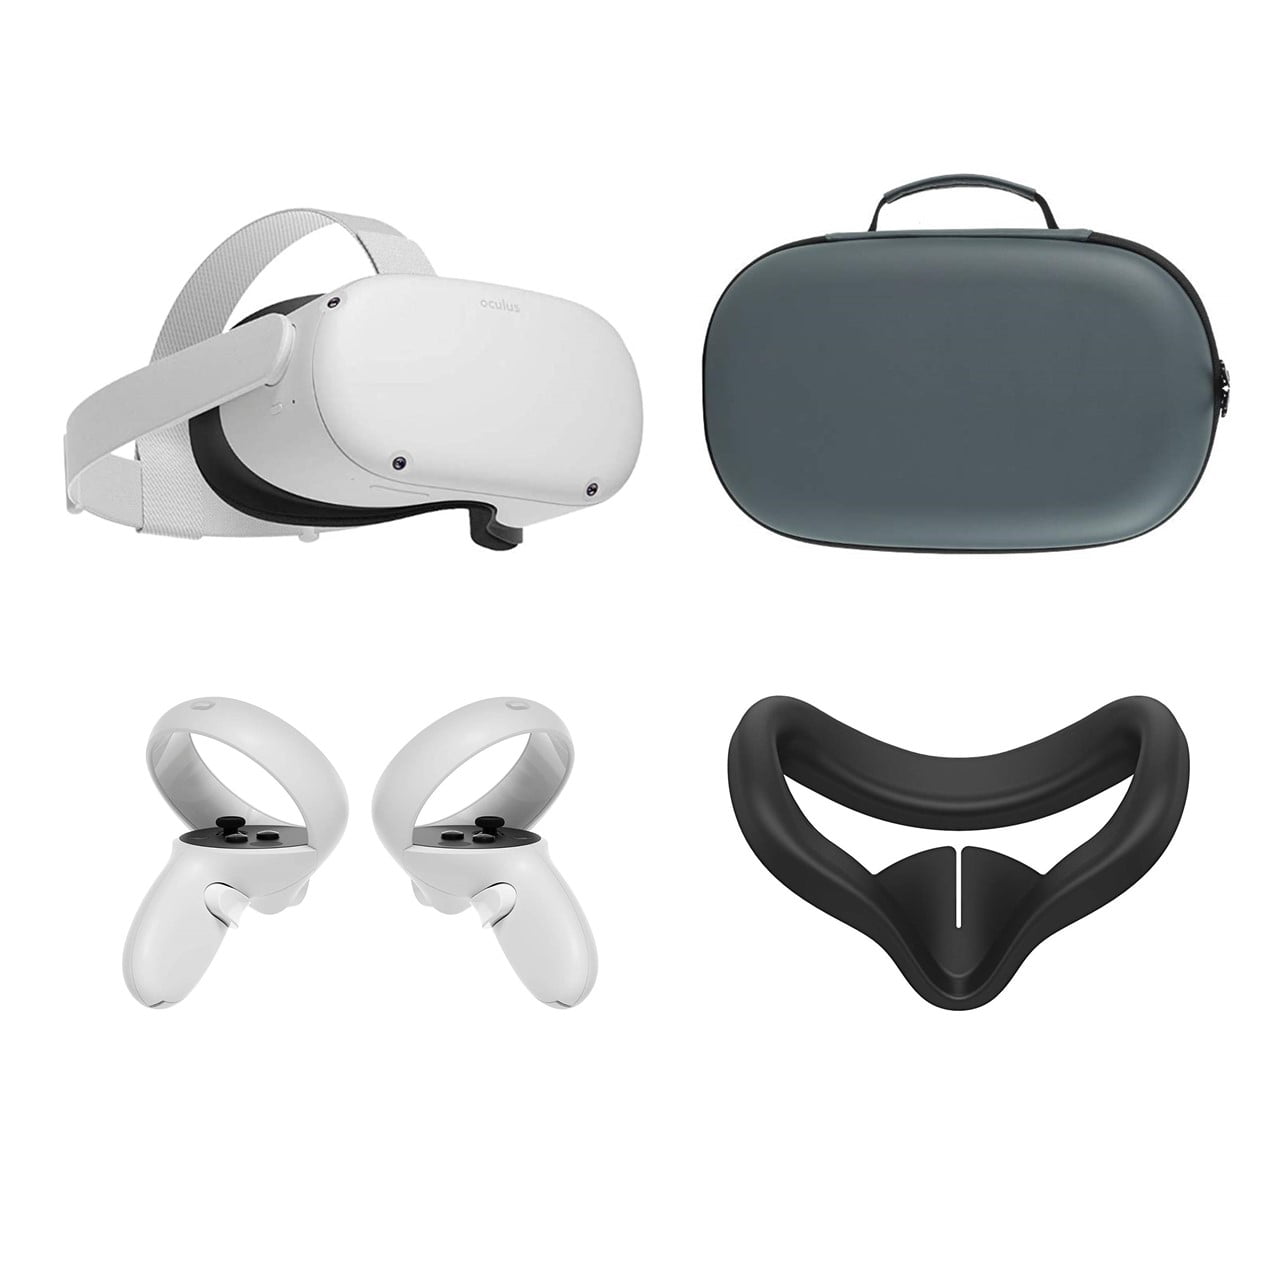 2021 Oculus Quest 2 All-In-One VR Headset 128GB, Touch Controllers,  1832x1920 up to 90 Hz Refresh Rate LCD, Glasses Compatible, 3D Audio,  Mytrix 